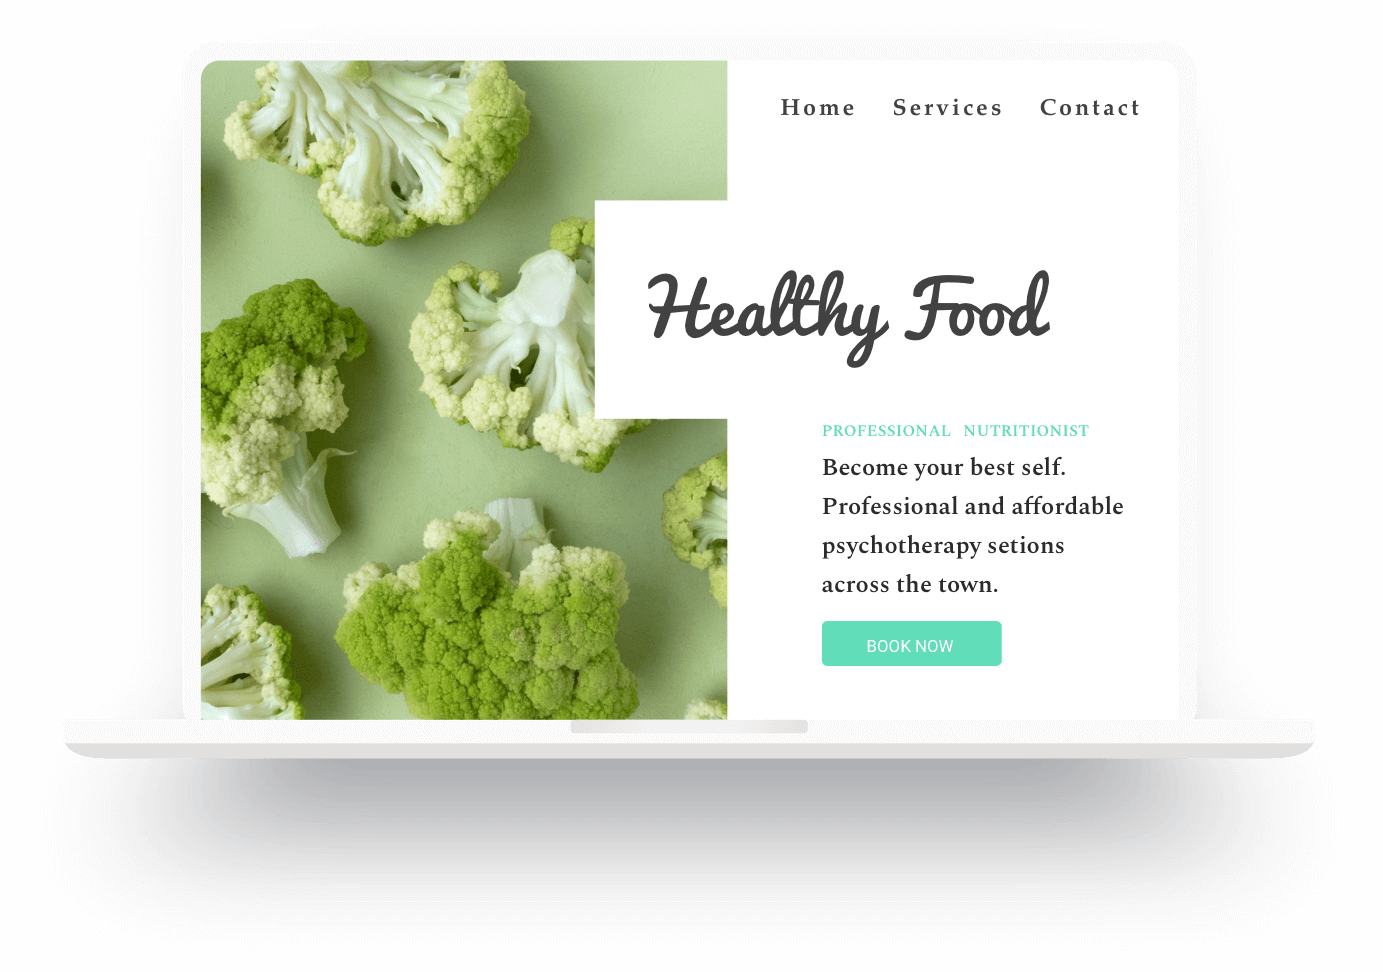 Example of a nutritionist's website built with Jimdo